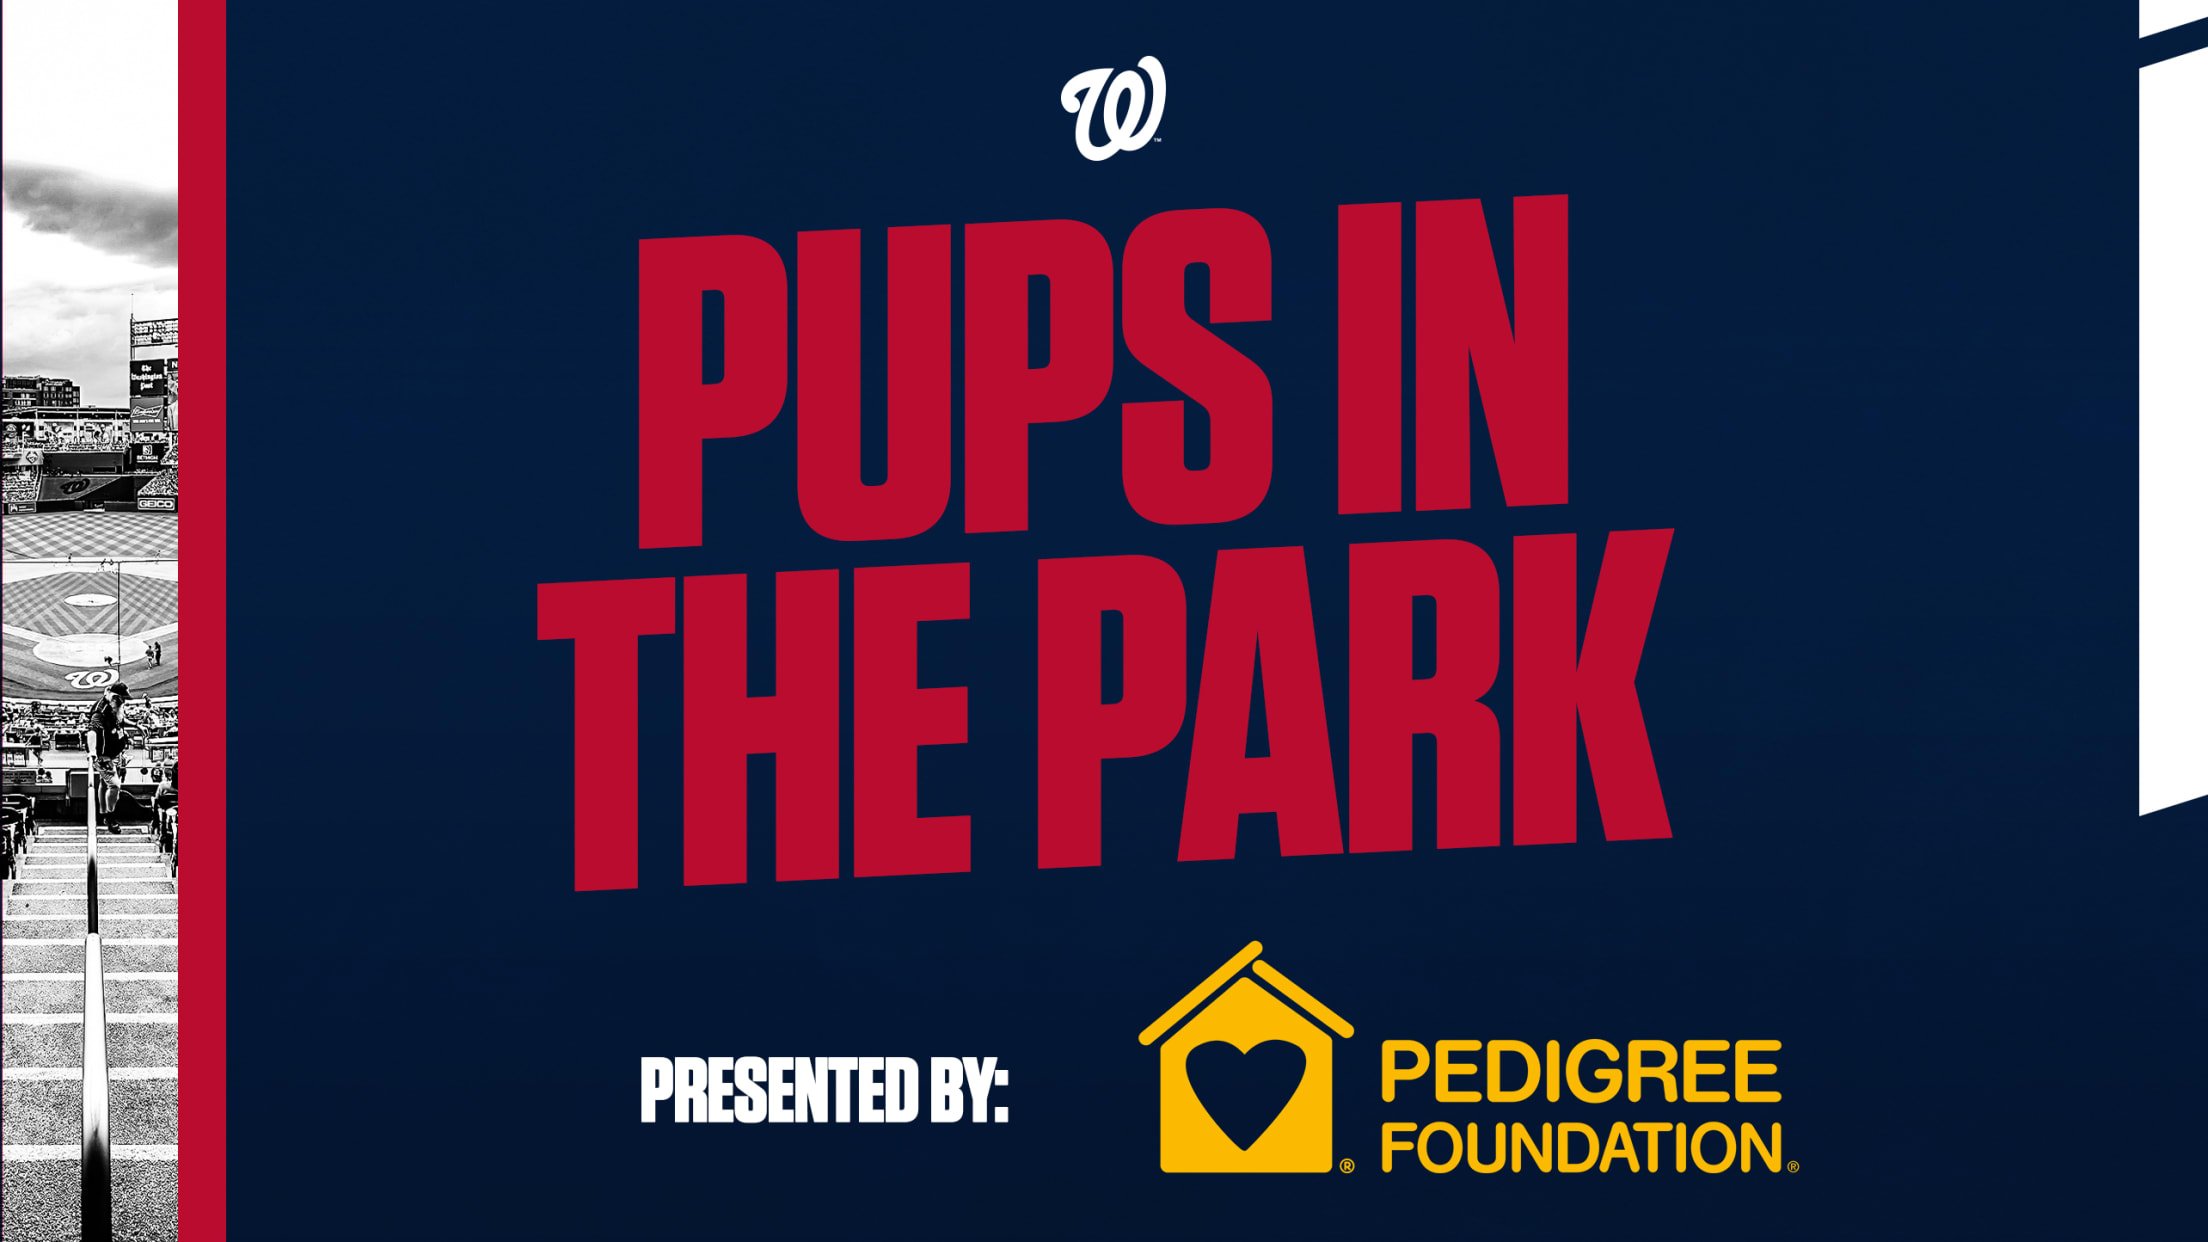 Giveaways, updated merch, and new food coming to Nats Park